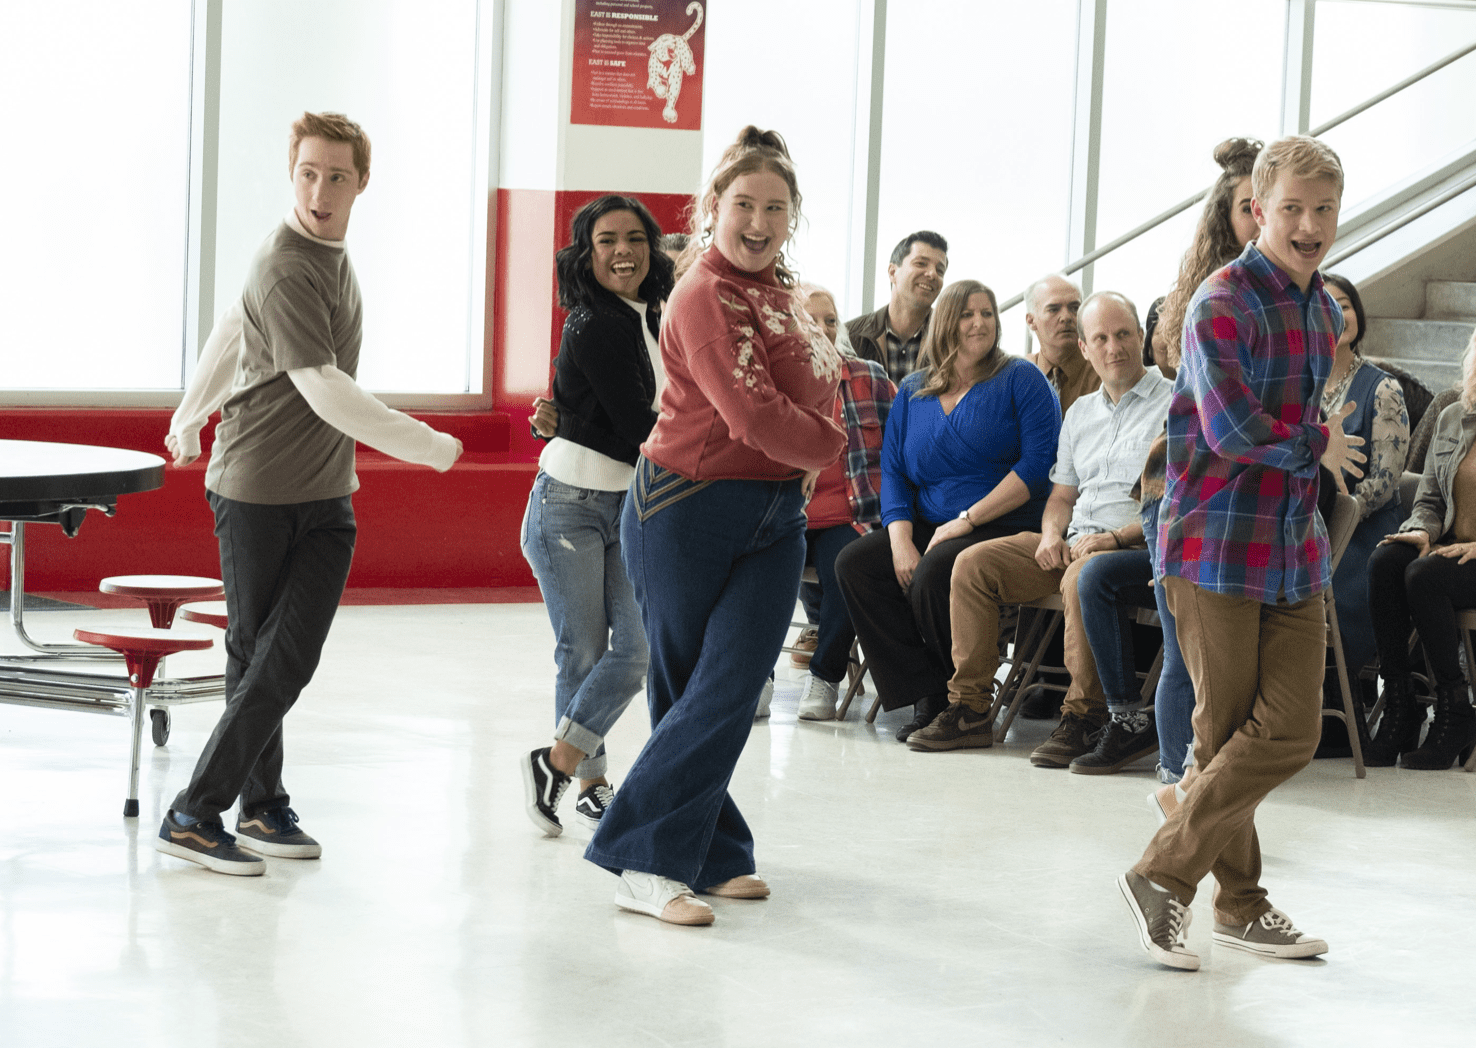 A group of students dances in the middle of what seems to be a high school cafeteria.